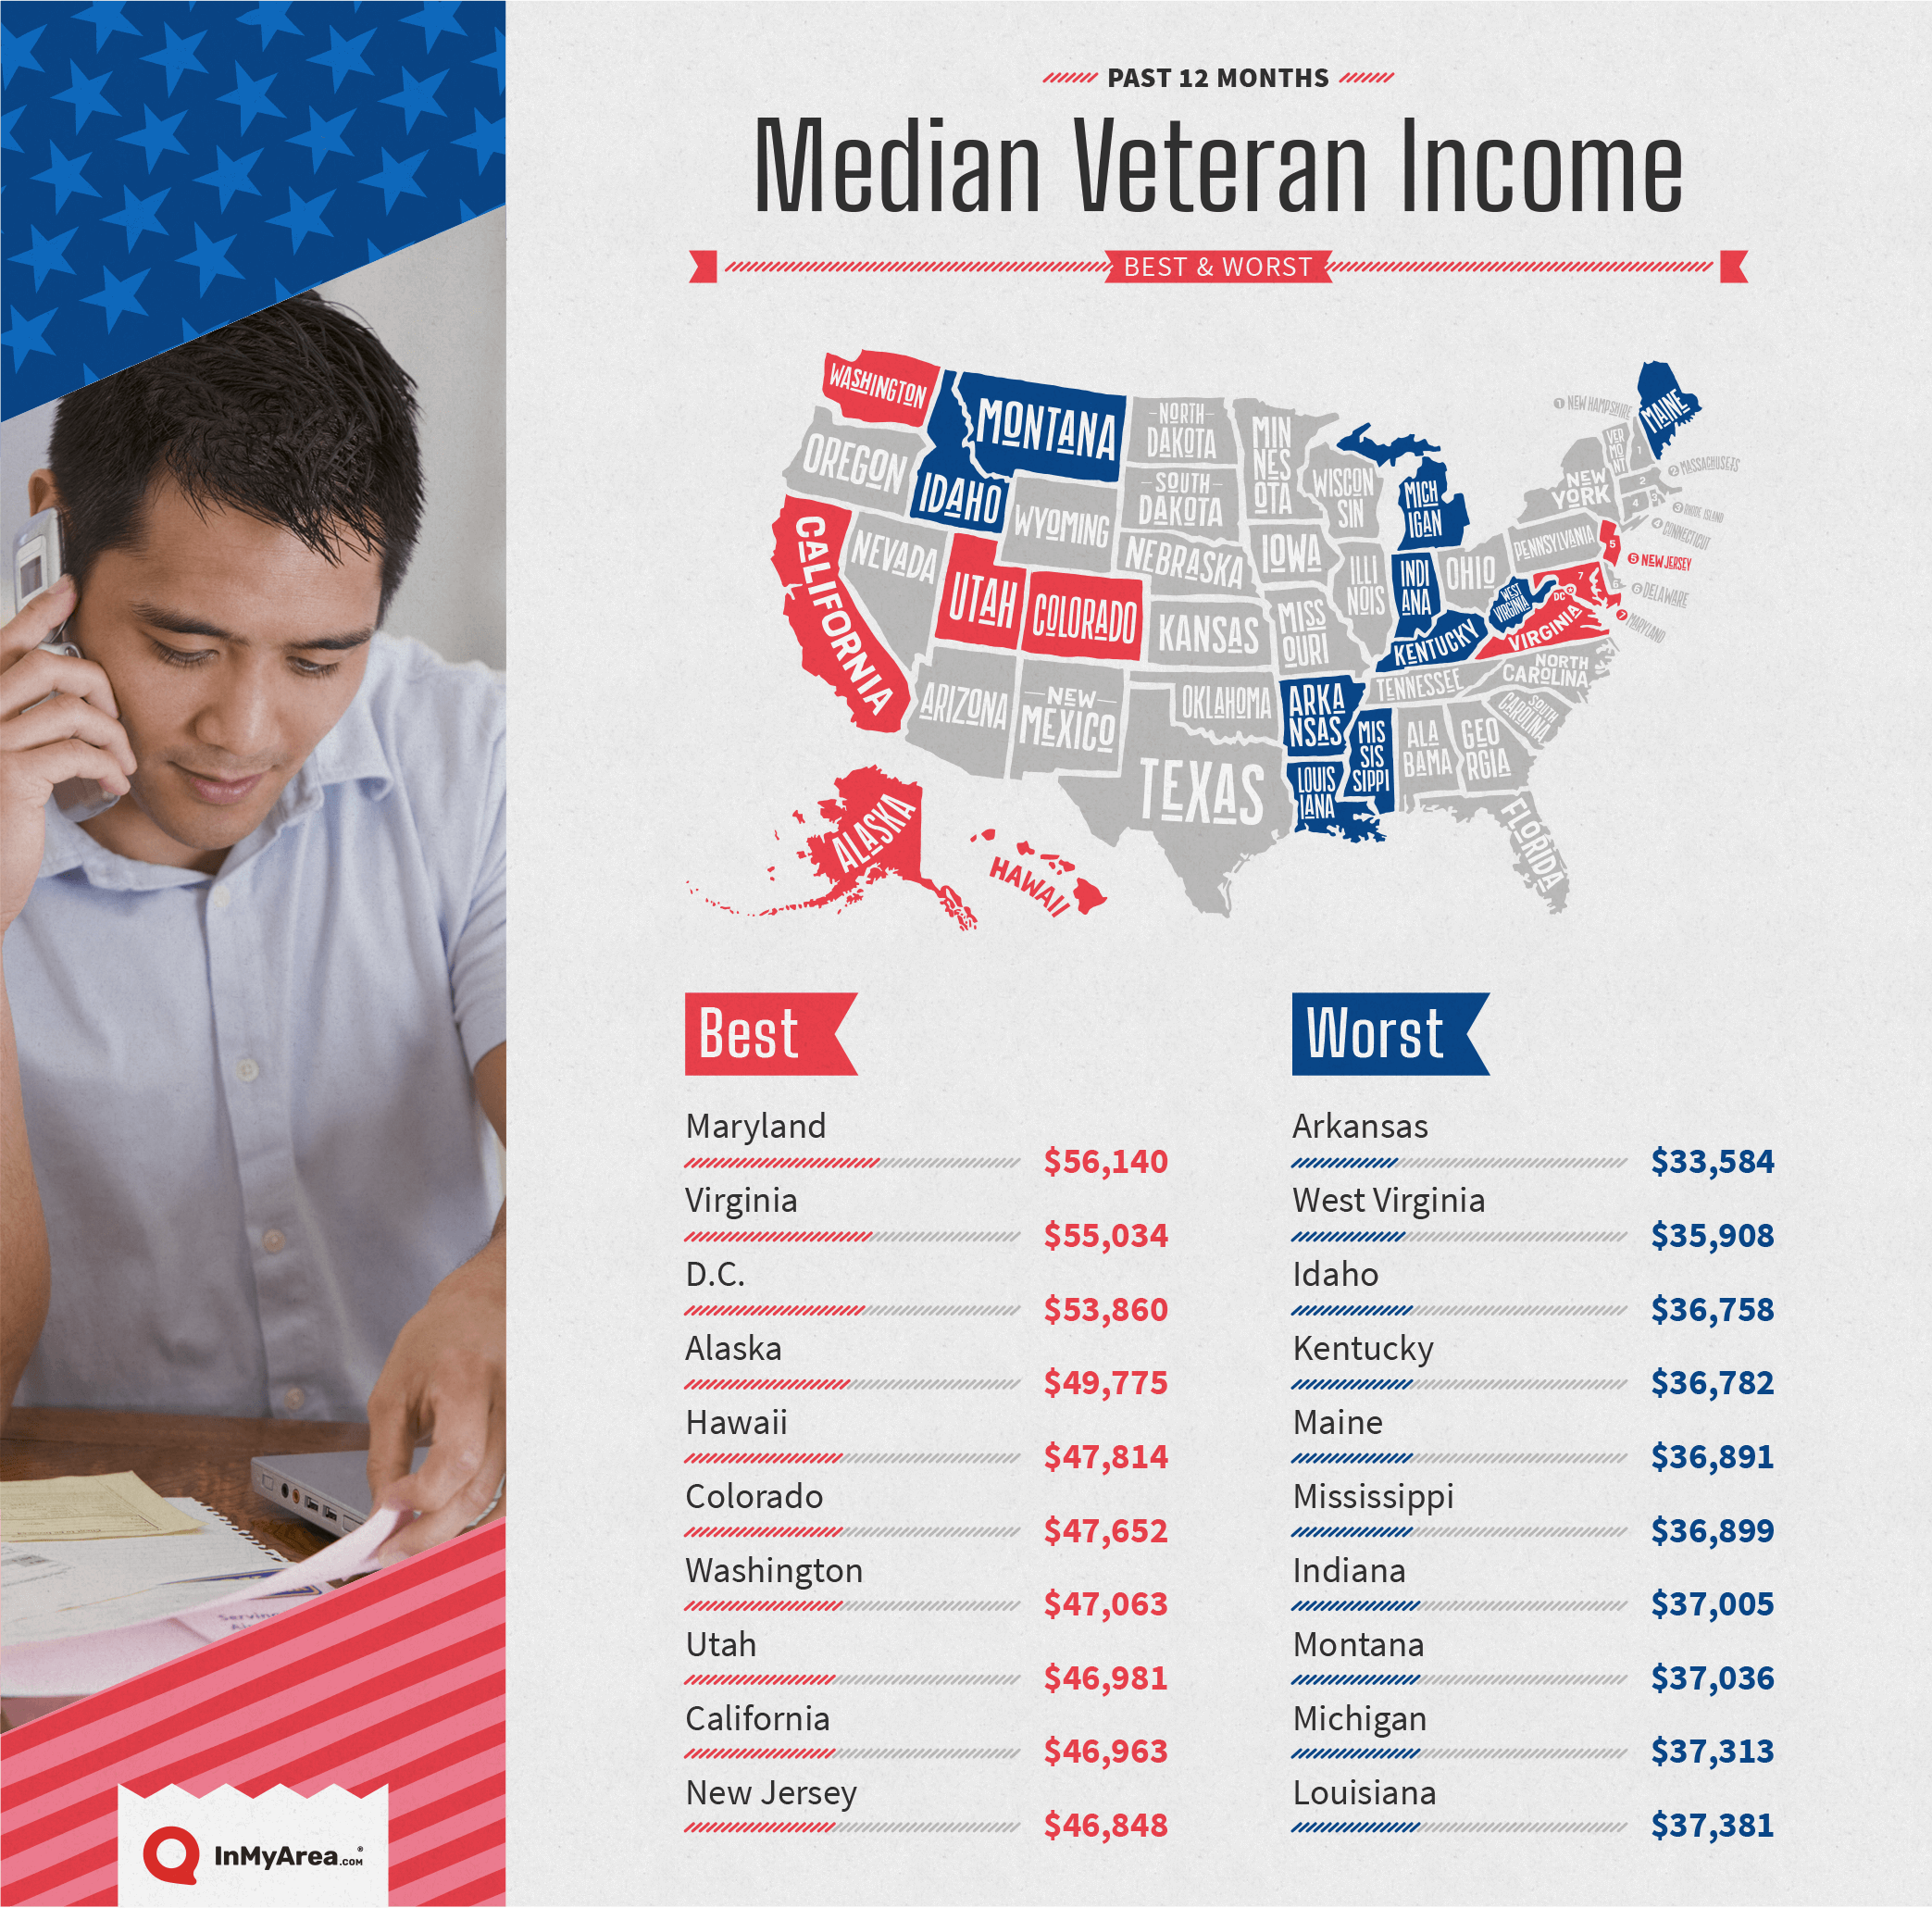 graph showing median veteran income by area